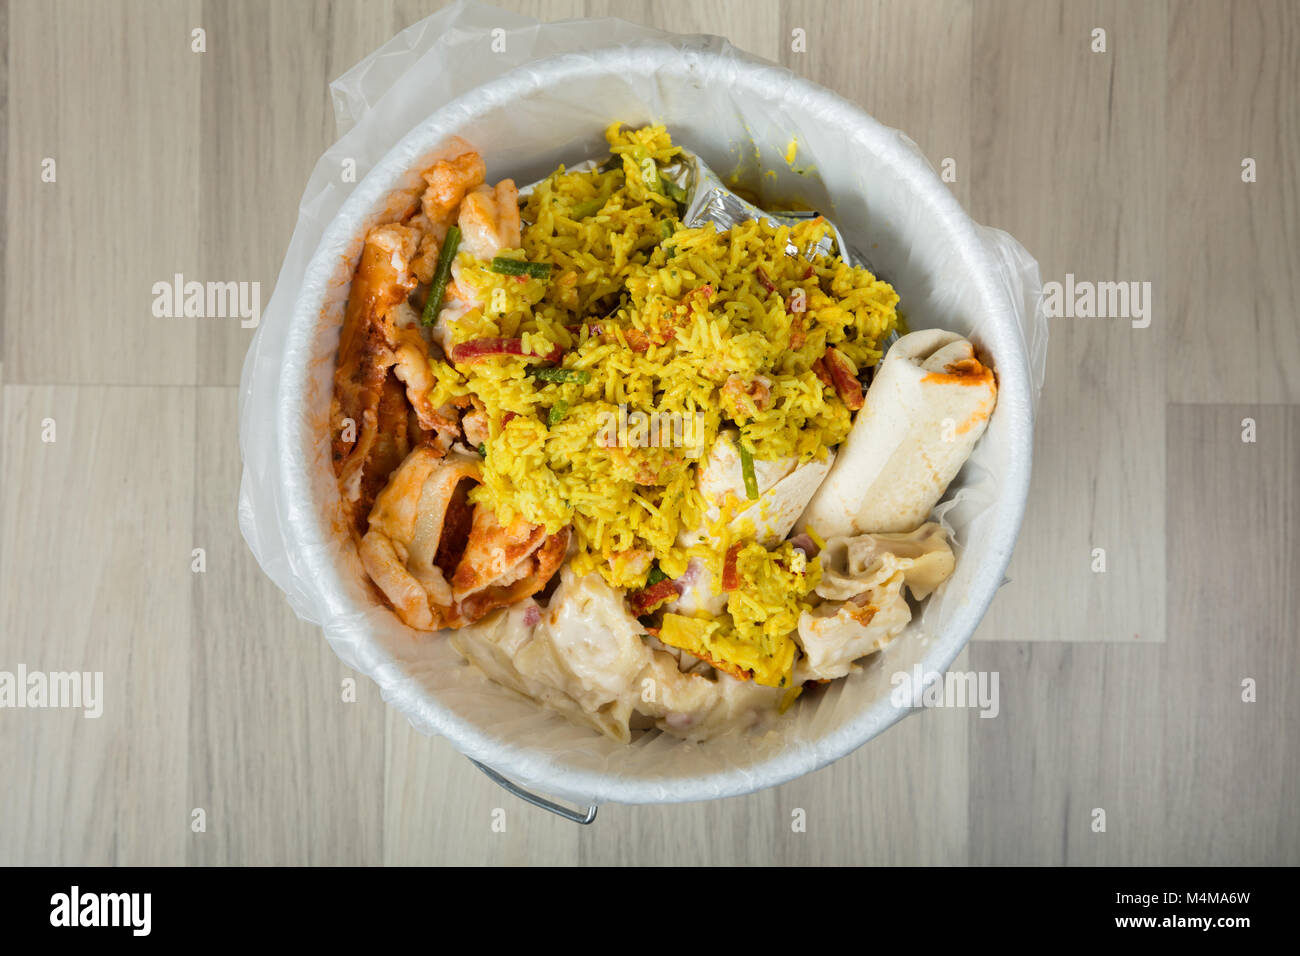 Close-up Of White Trash Bin Covered With Leftover Food Stock Photo